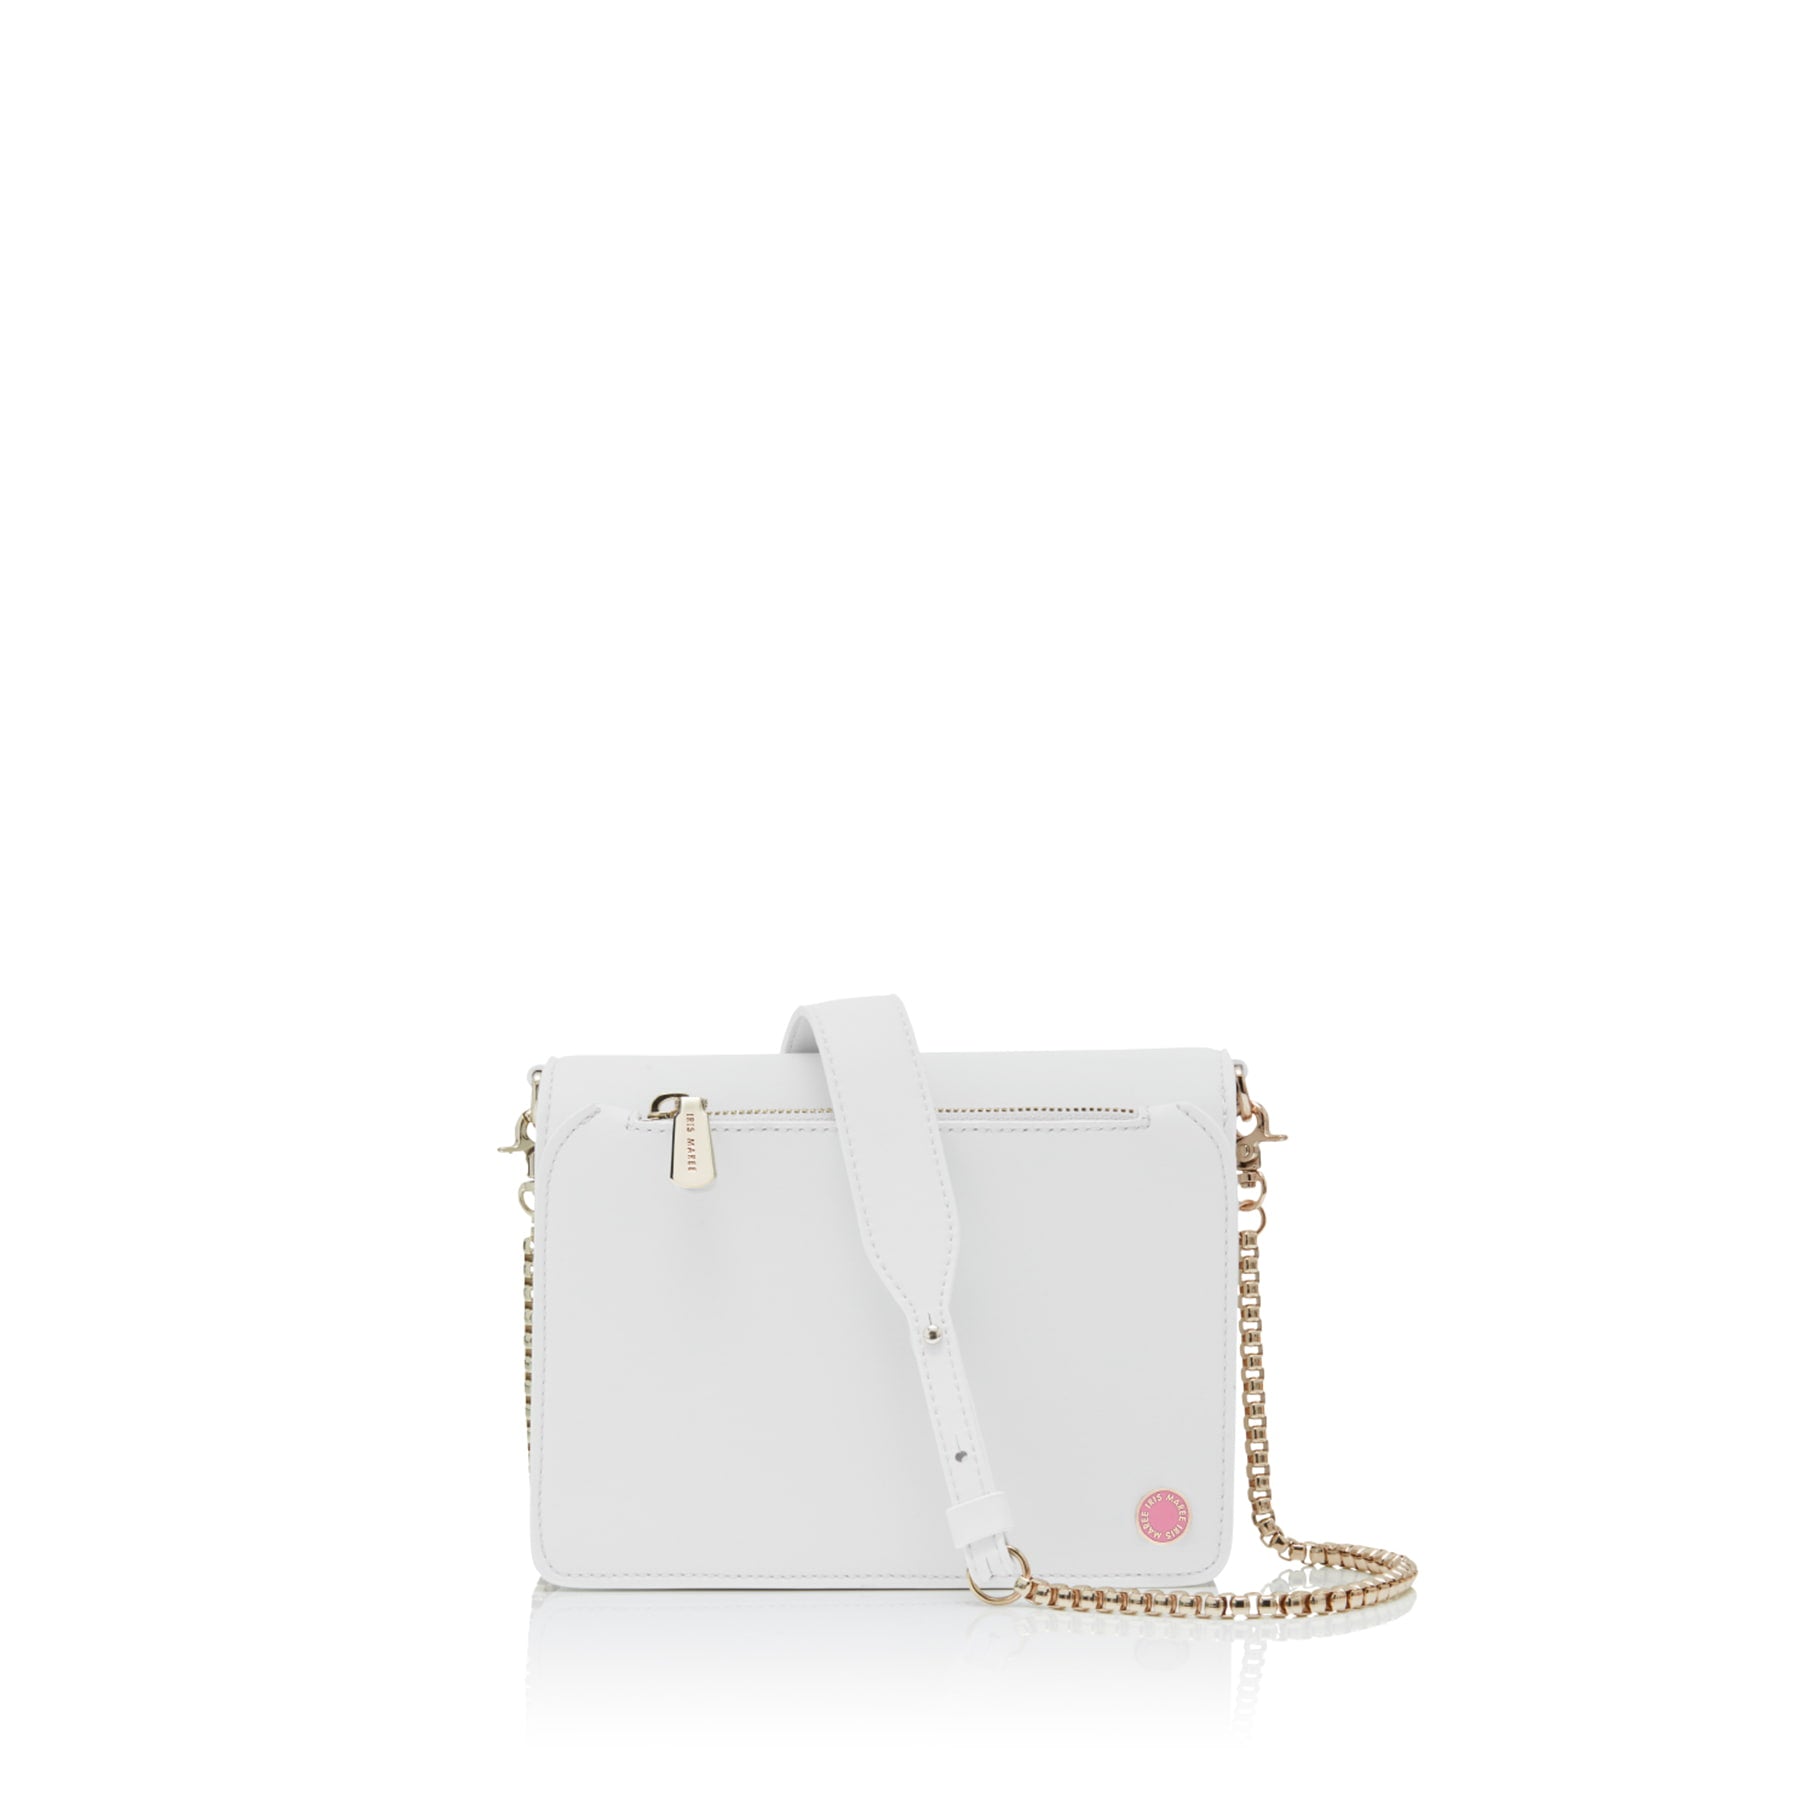 Firefly Daisy white cross-body bag with gold chain and pink and gold Iris Maree logo on back side of the bag made environmentally conscious material Kayla Fabric